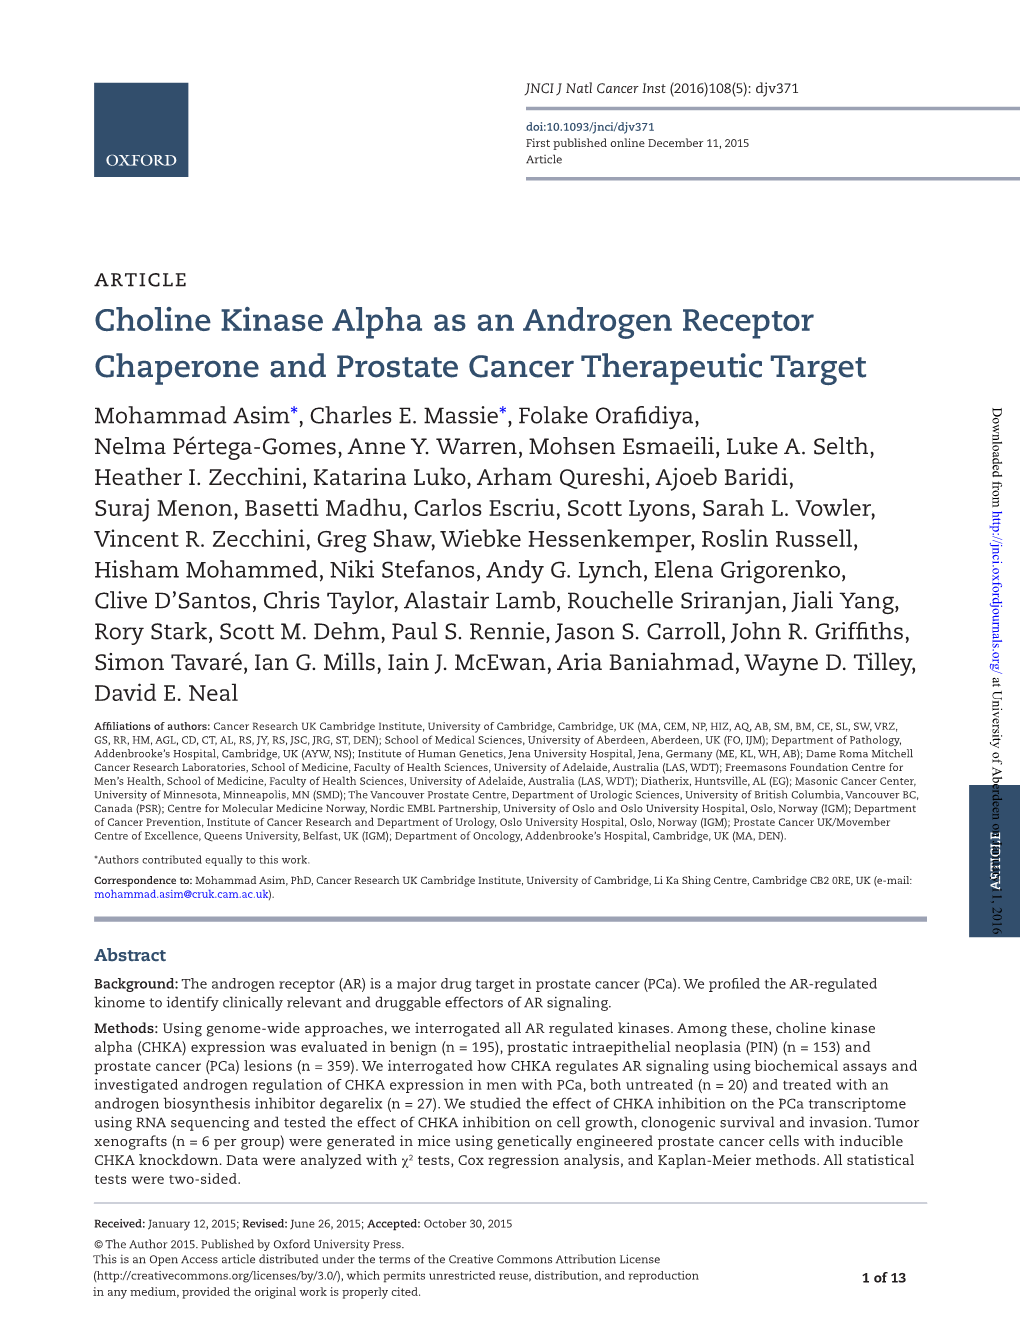 Choline Kinase Alpha As an Androgen Receptor Chaperone and Prostate Cancer Therapeutic Target